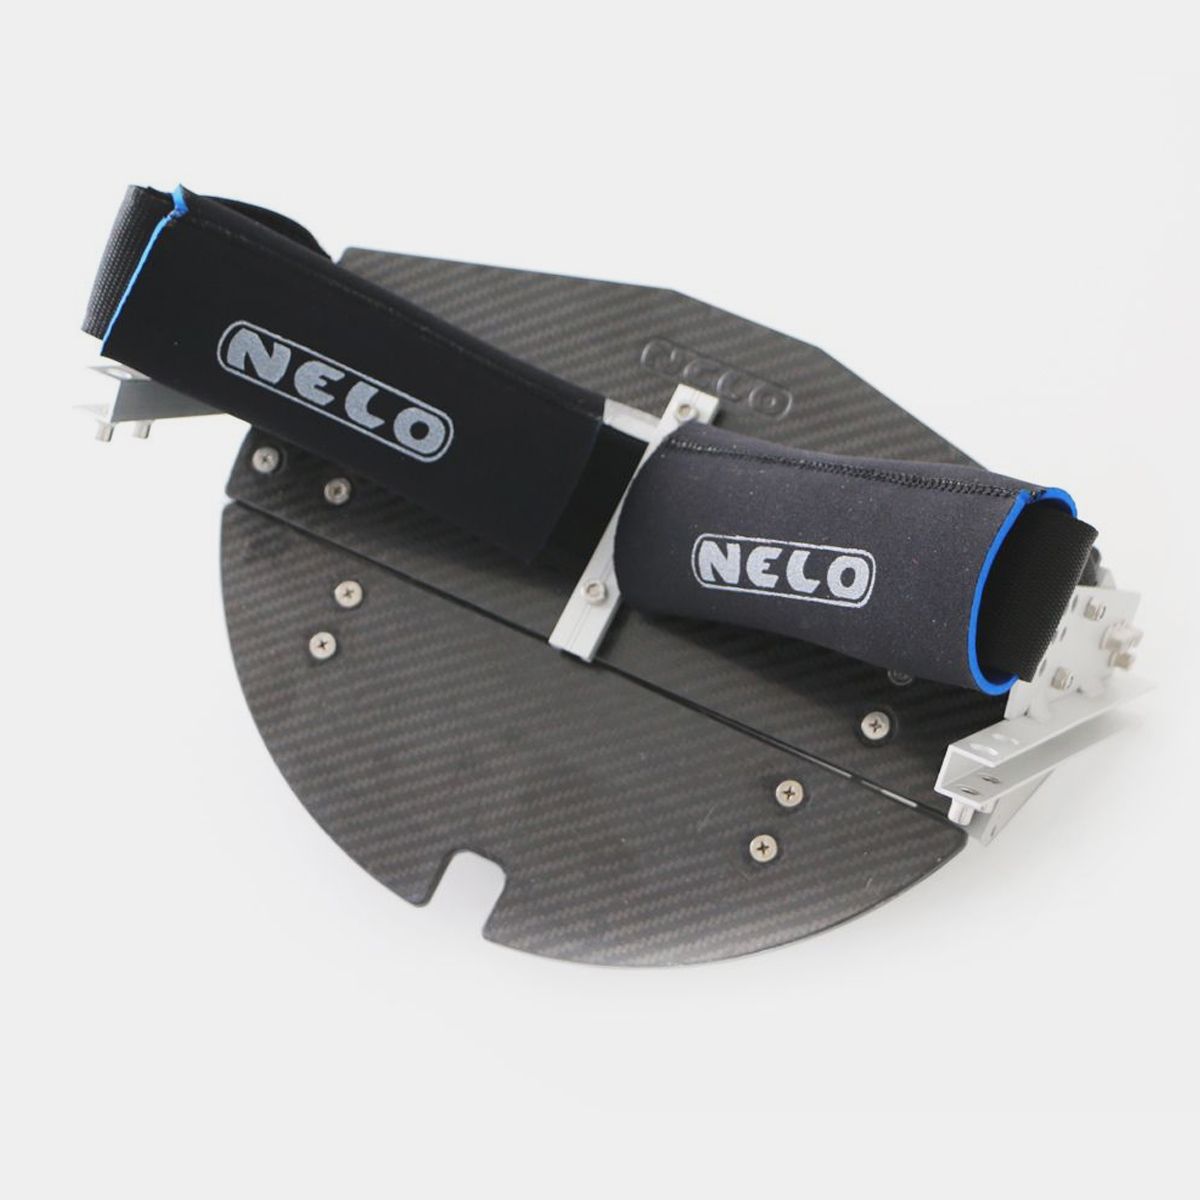 Nelo Foot Rest K2 angle view